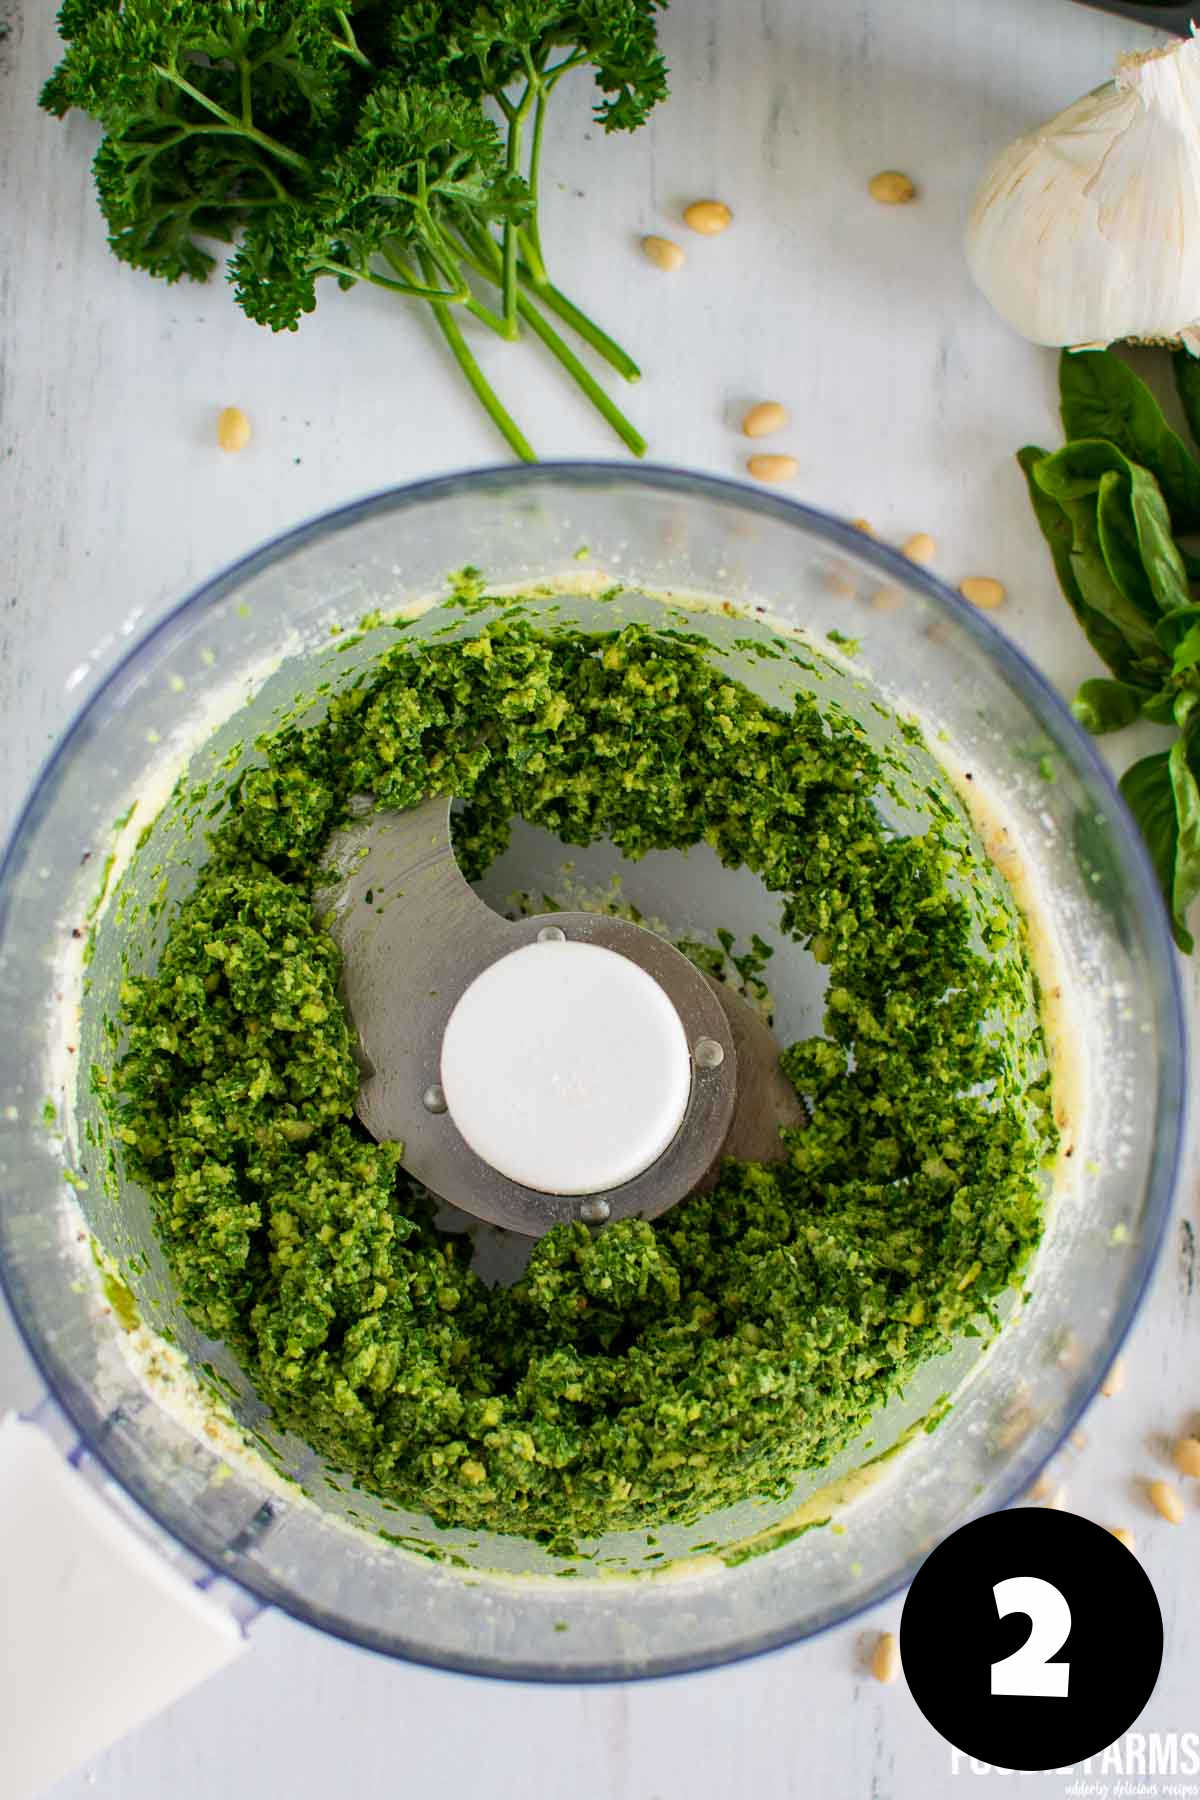 Chopped green herbs in a food processor.